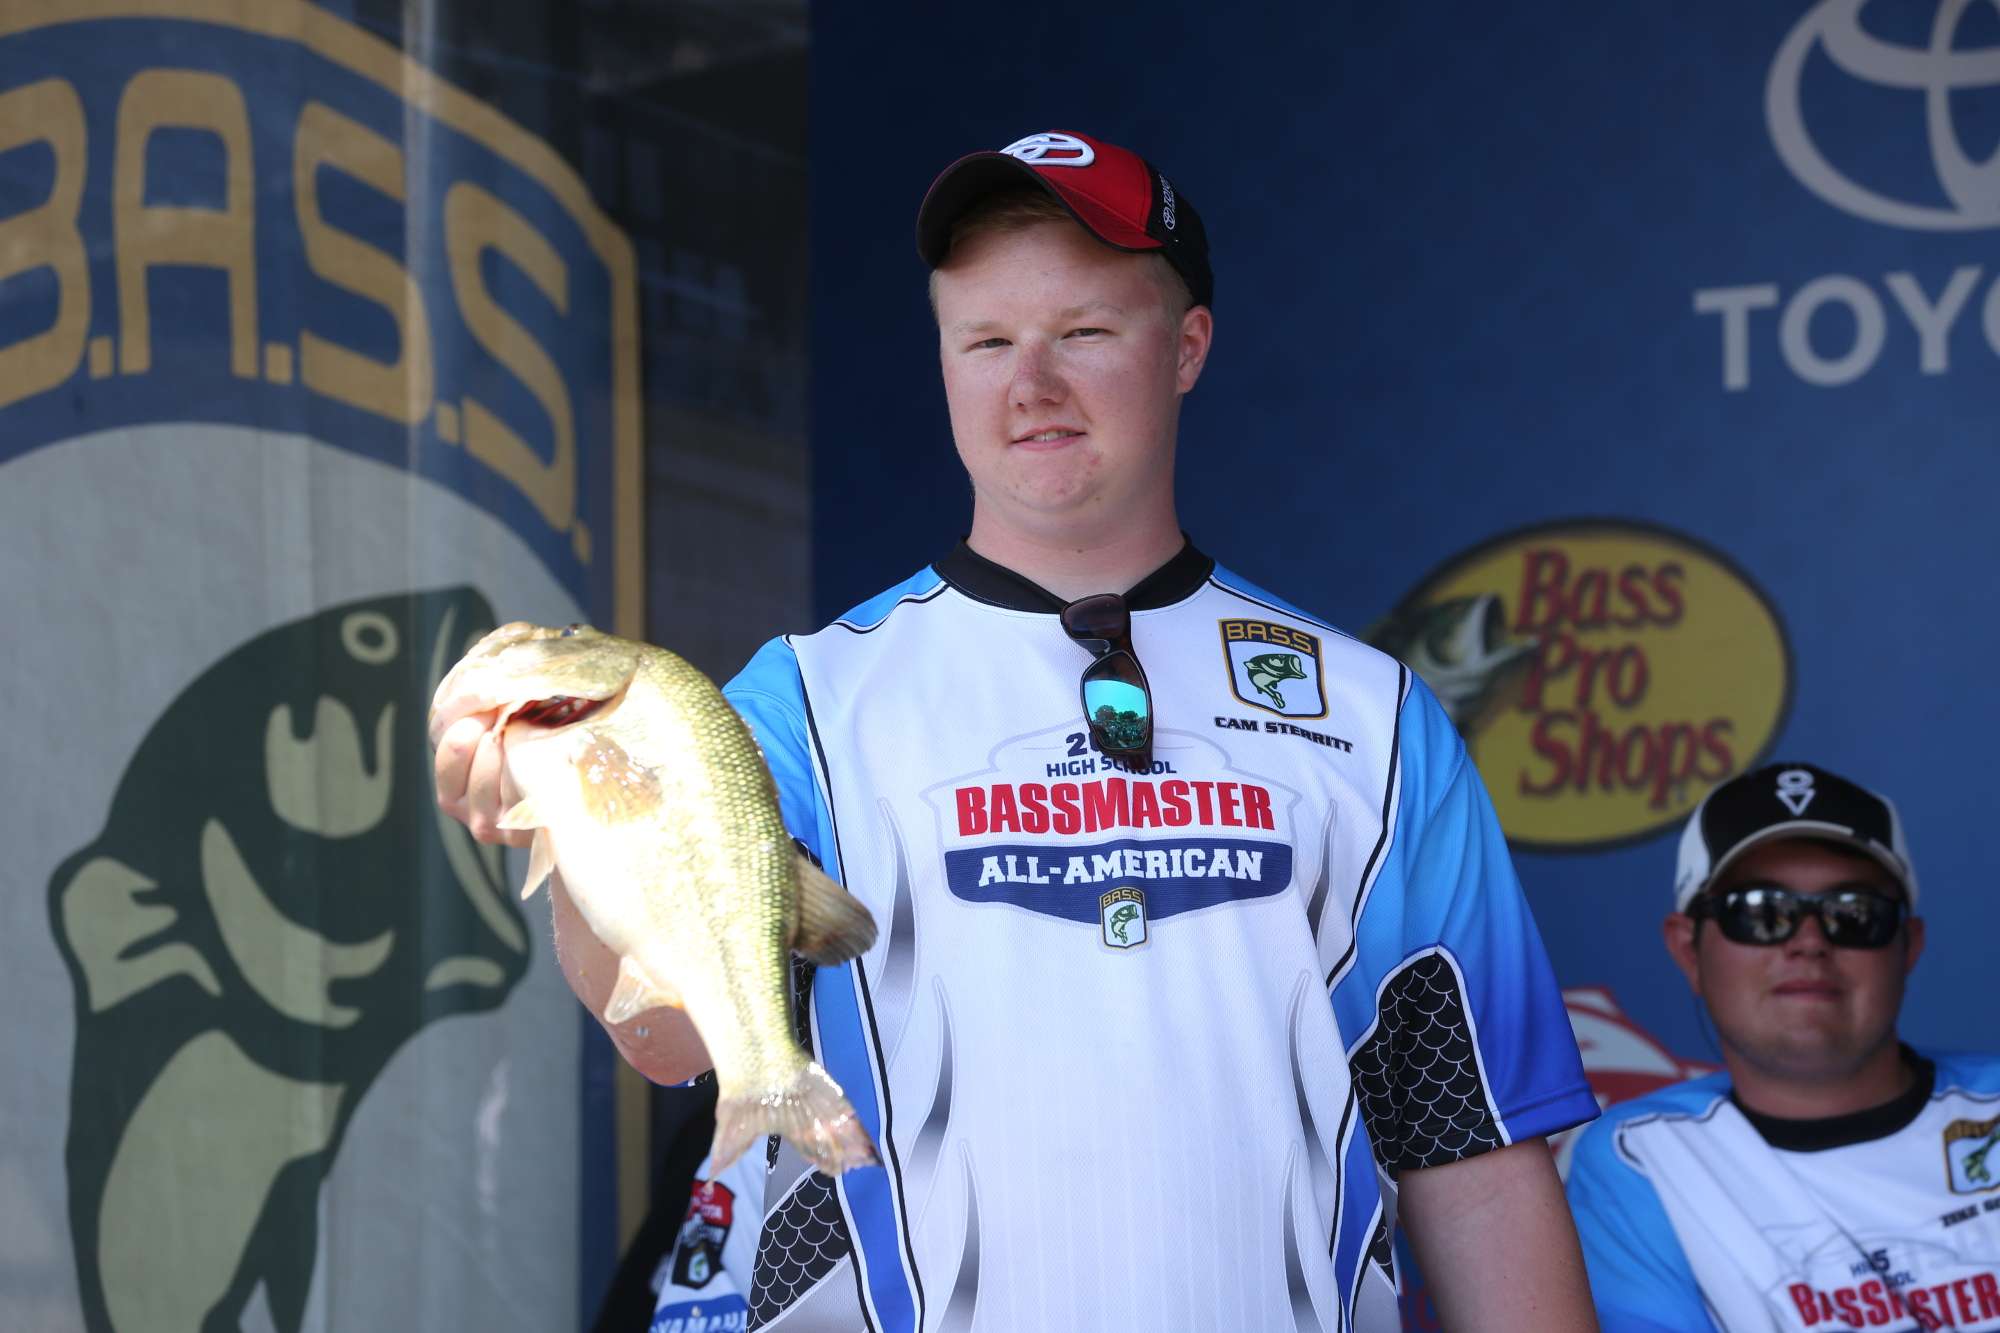 Cam Sterritt caught a giant and showed it off to the crowd.